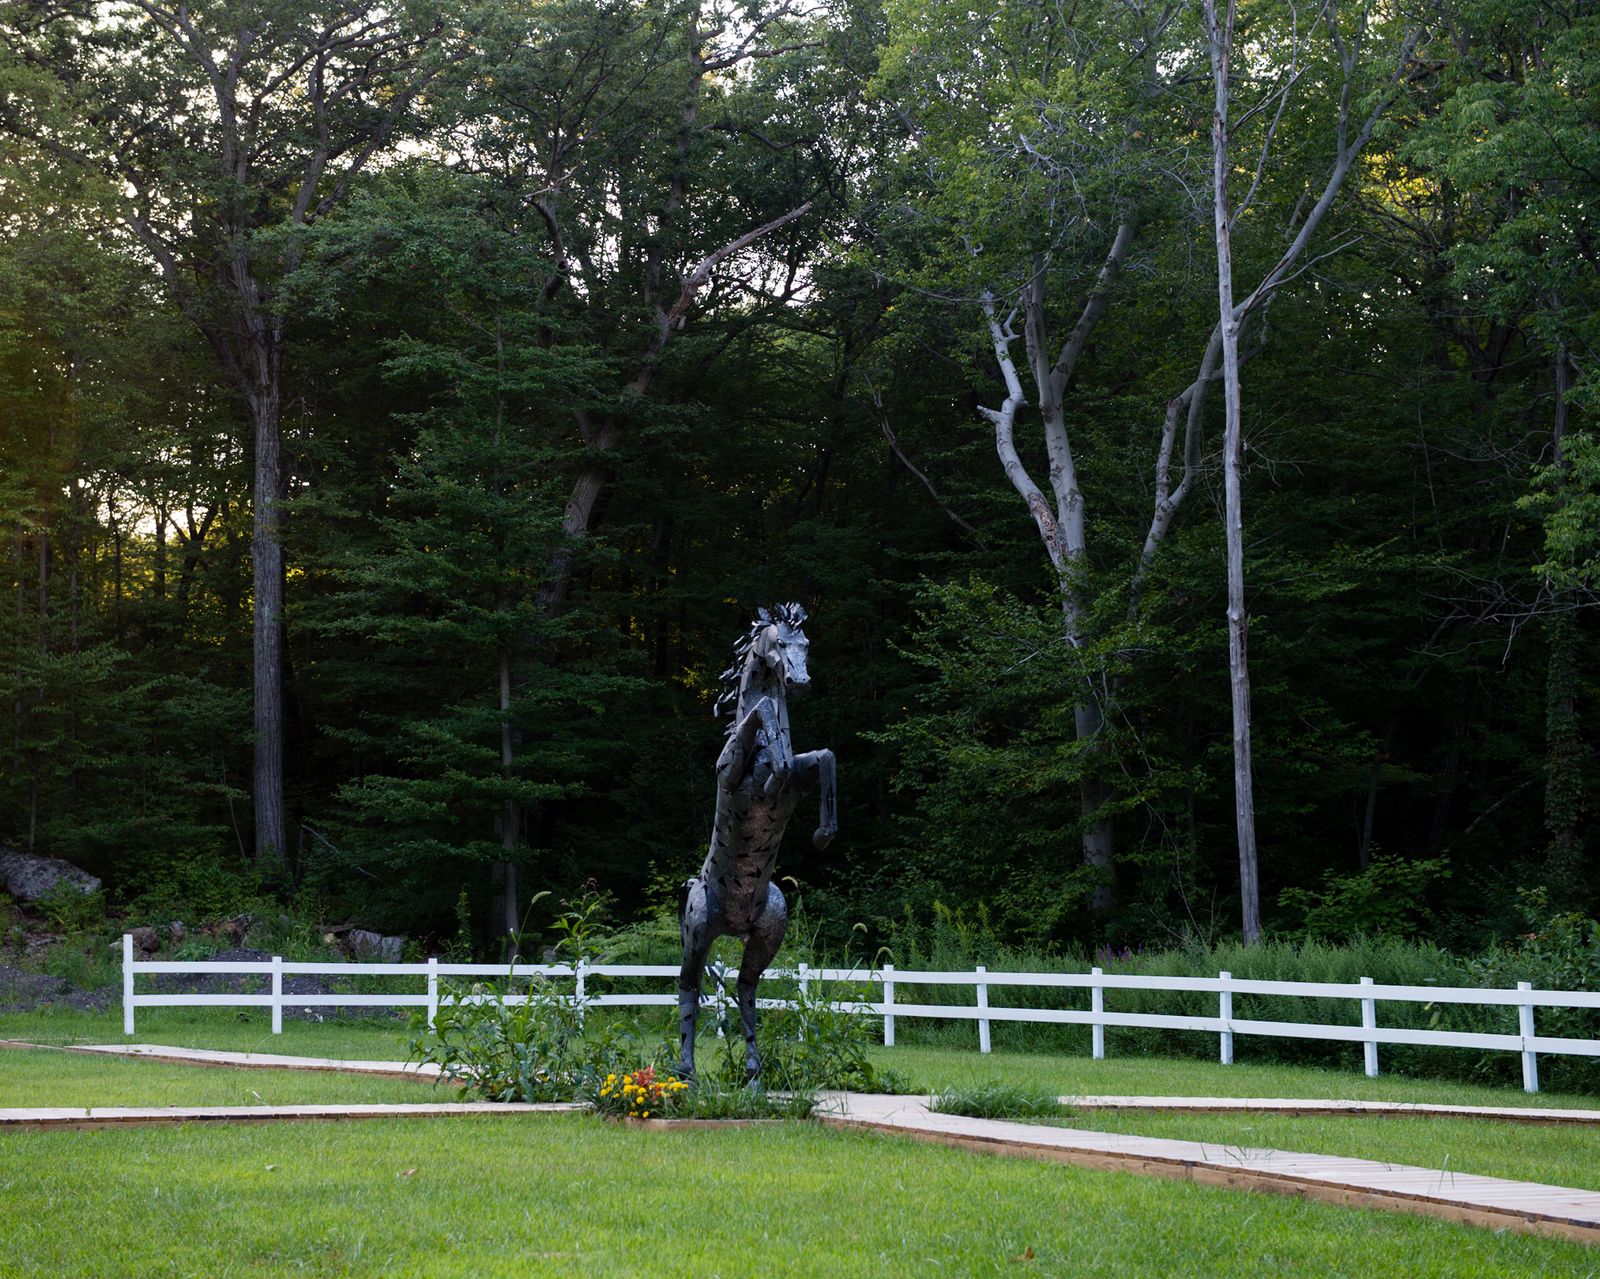 © Martin Toft - Black Horse, Stag Hill Road, Houvenkopf Mountain, Mahwah, New Jersey, United States, 25 August 2014